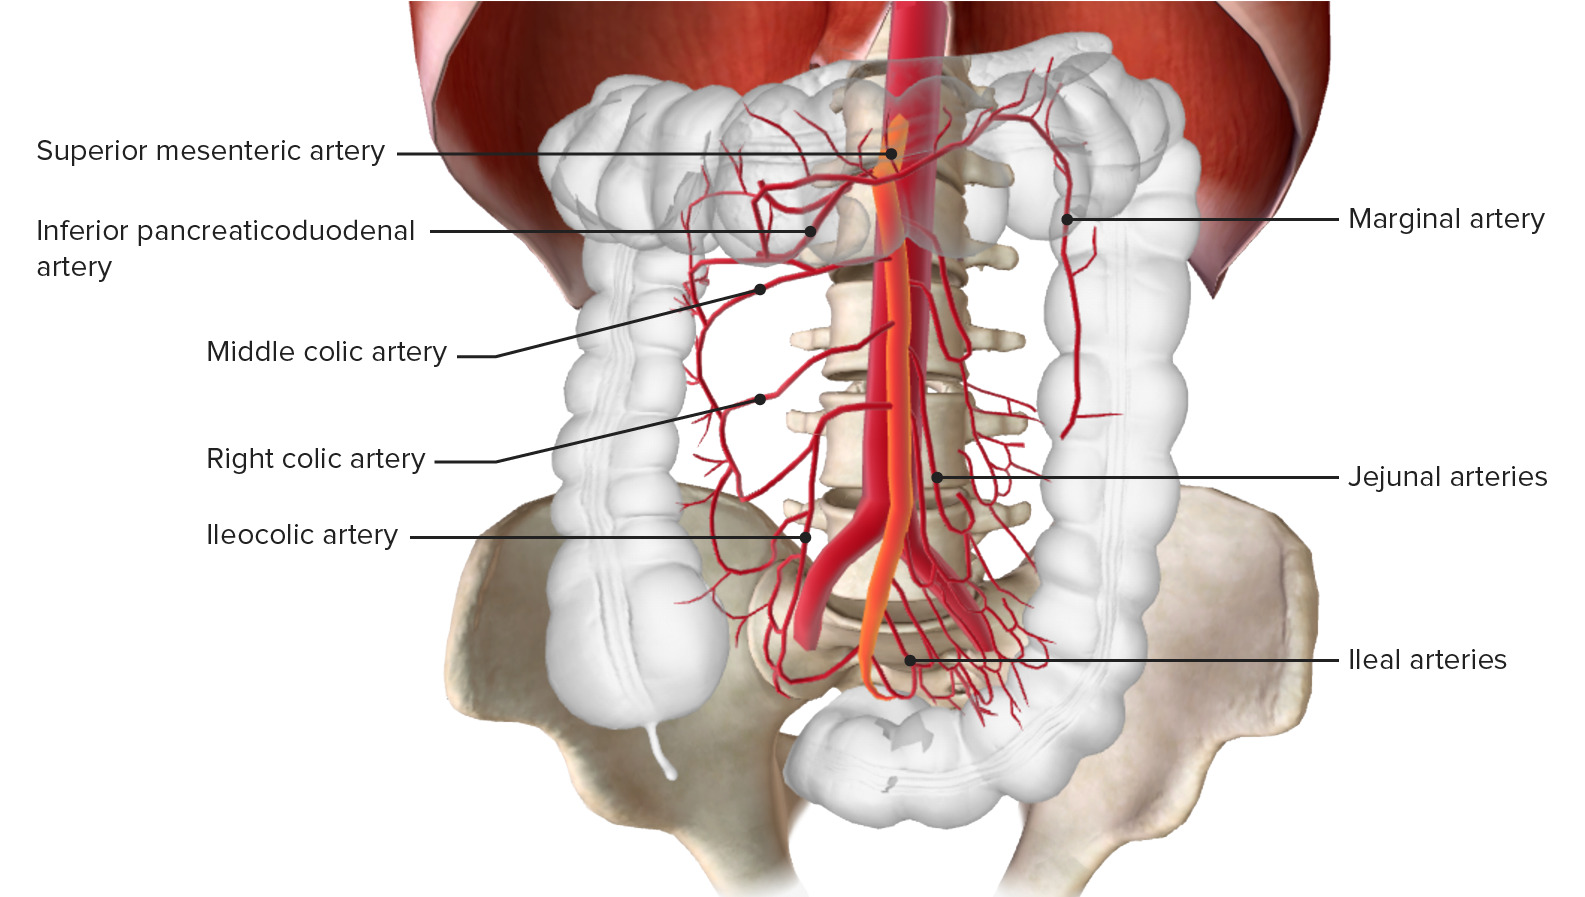 Blood supply of the small intestine through the superior mesenteric artery